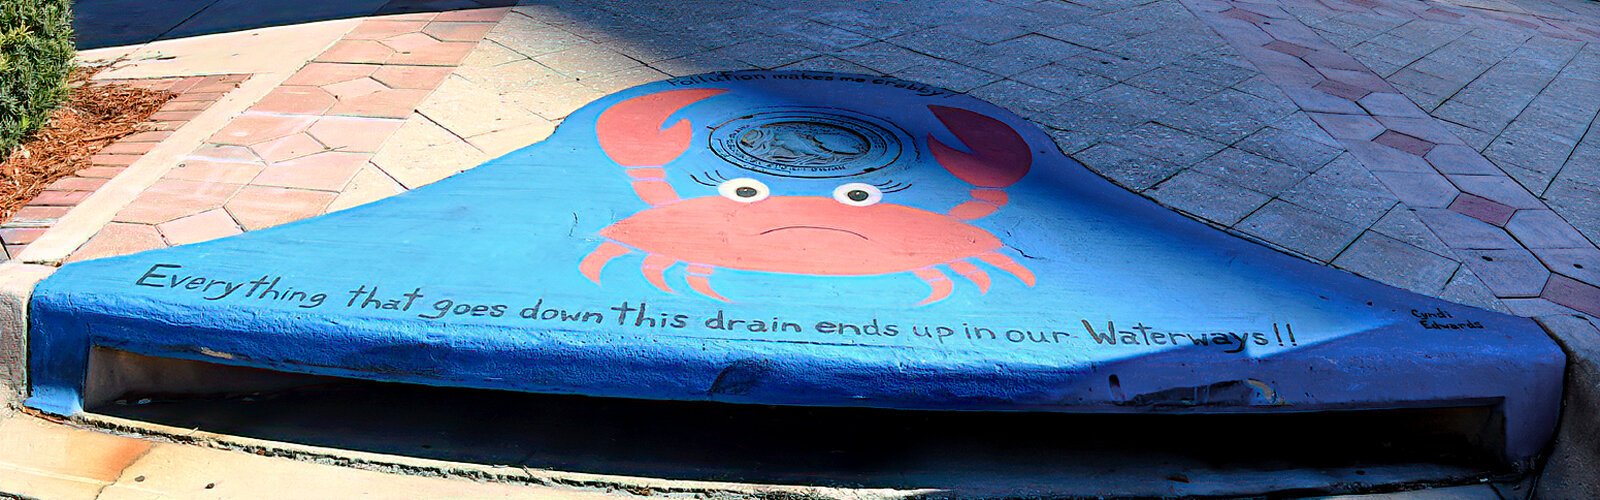 “Pollution makes me crabby” by Channel 8 News anchor Cyndi Edwards is part of Clearwater's storm drain mural series meant to increase awareness that litter originates on land and ends up in our waterways.